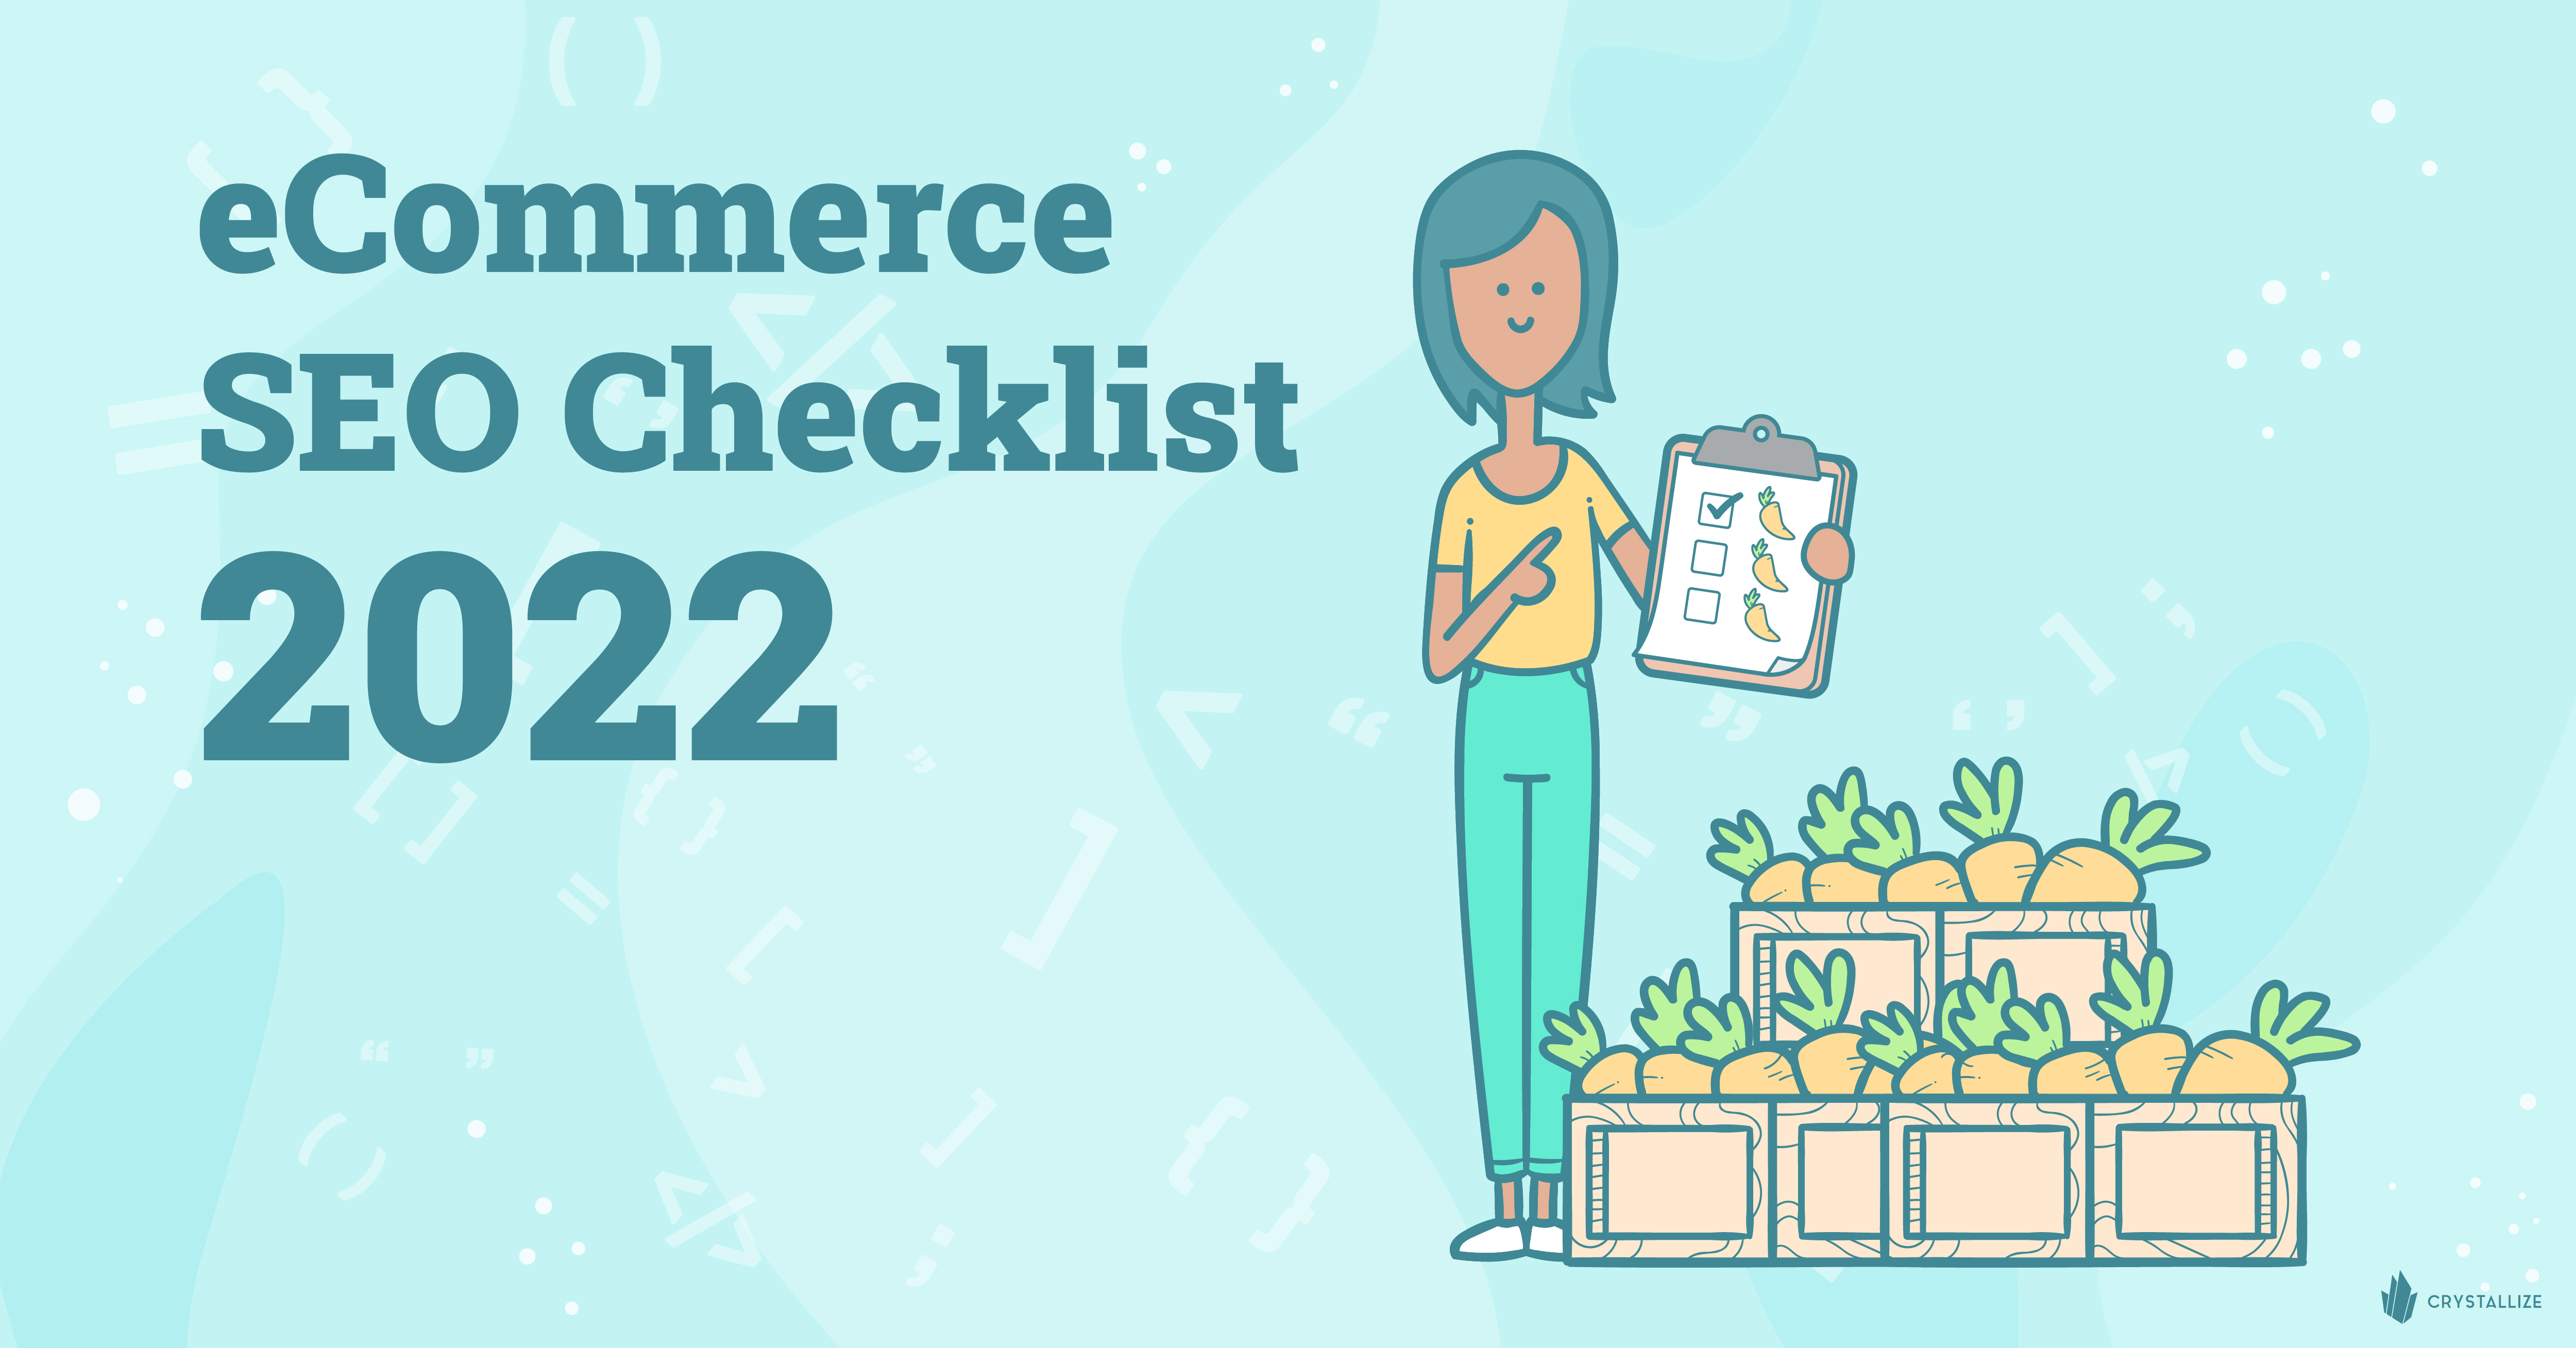 eCommerce SEO Checklist: The Best Practices For 2022